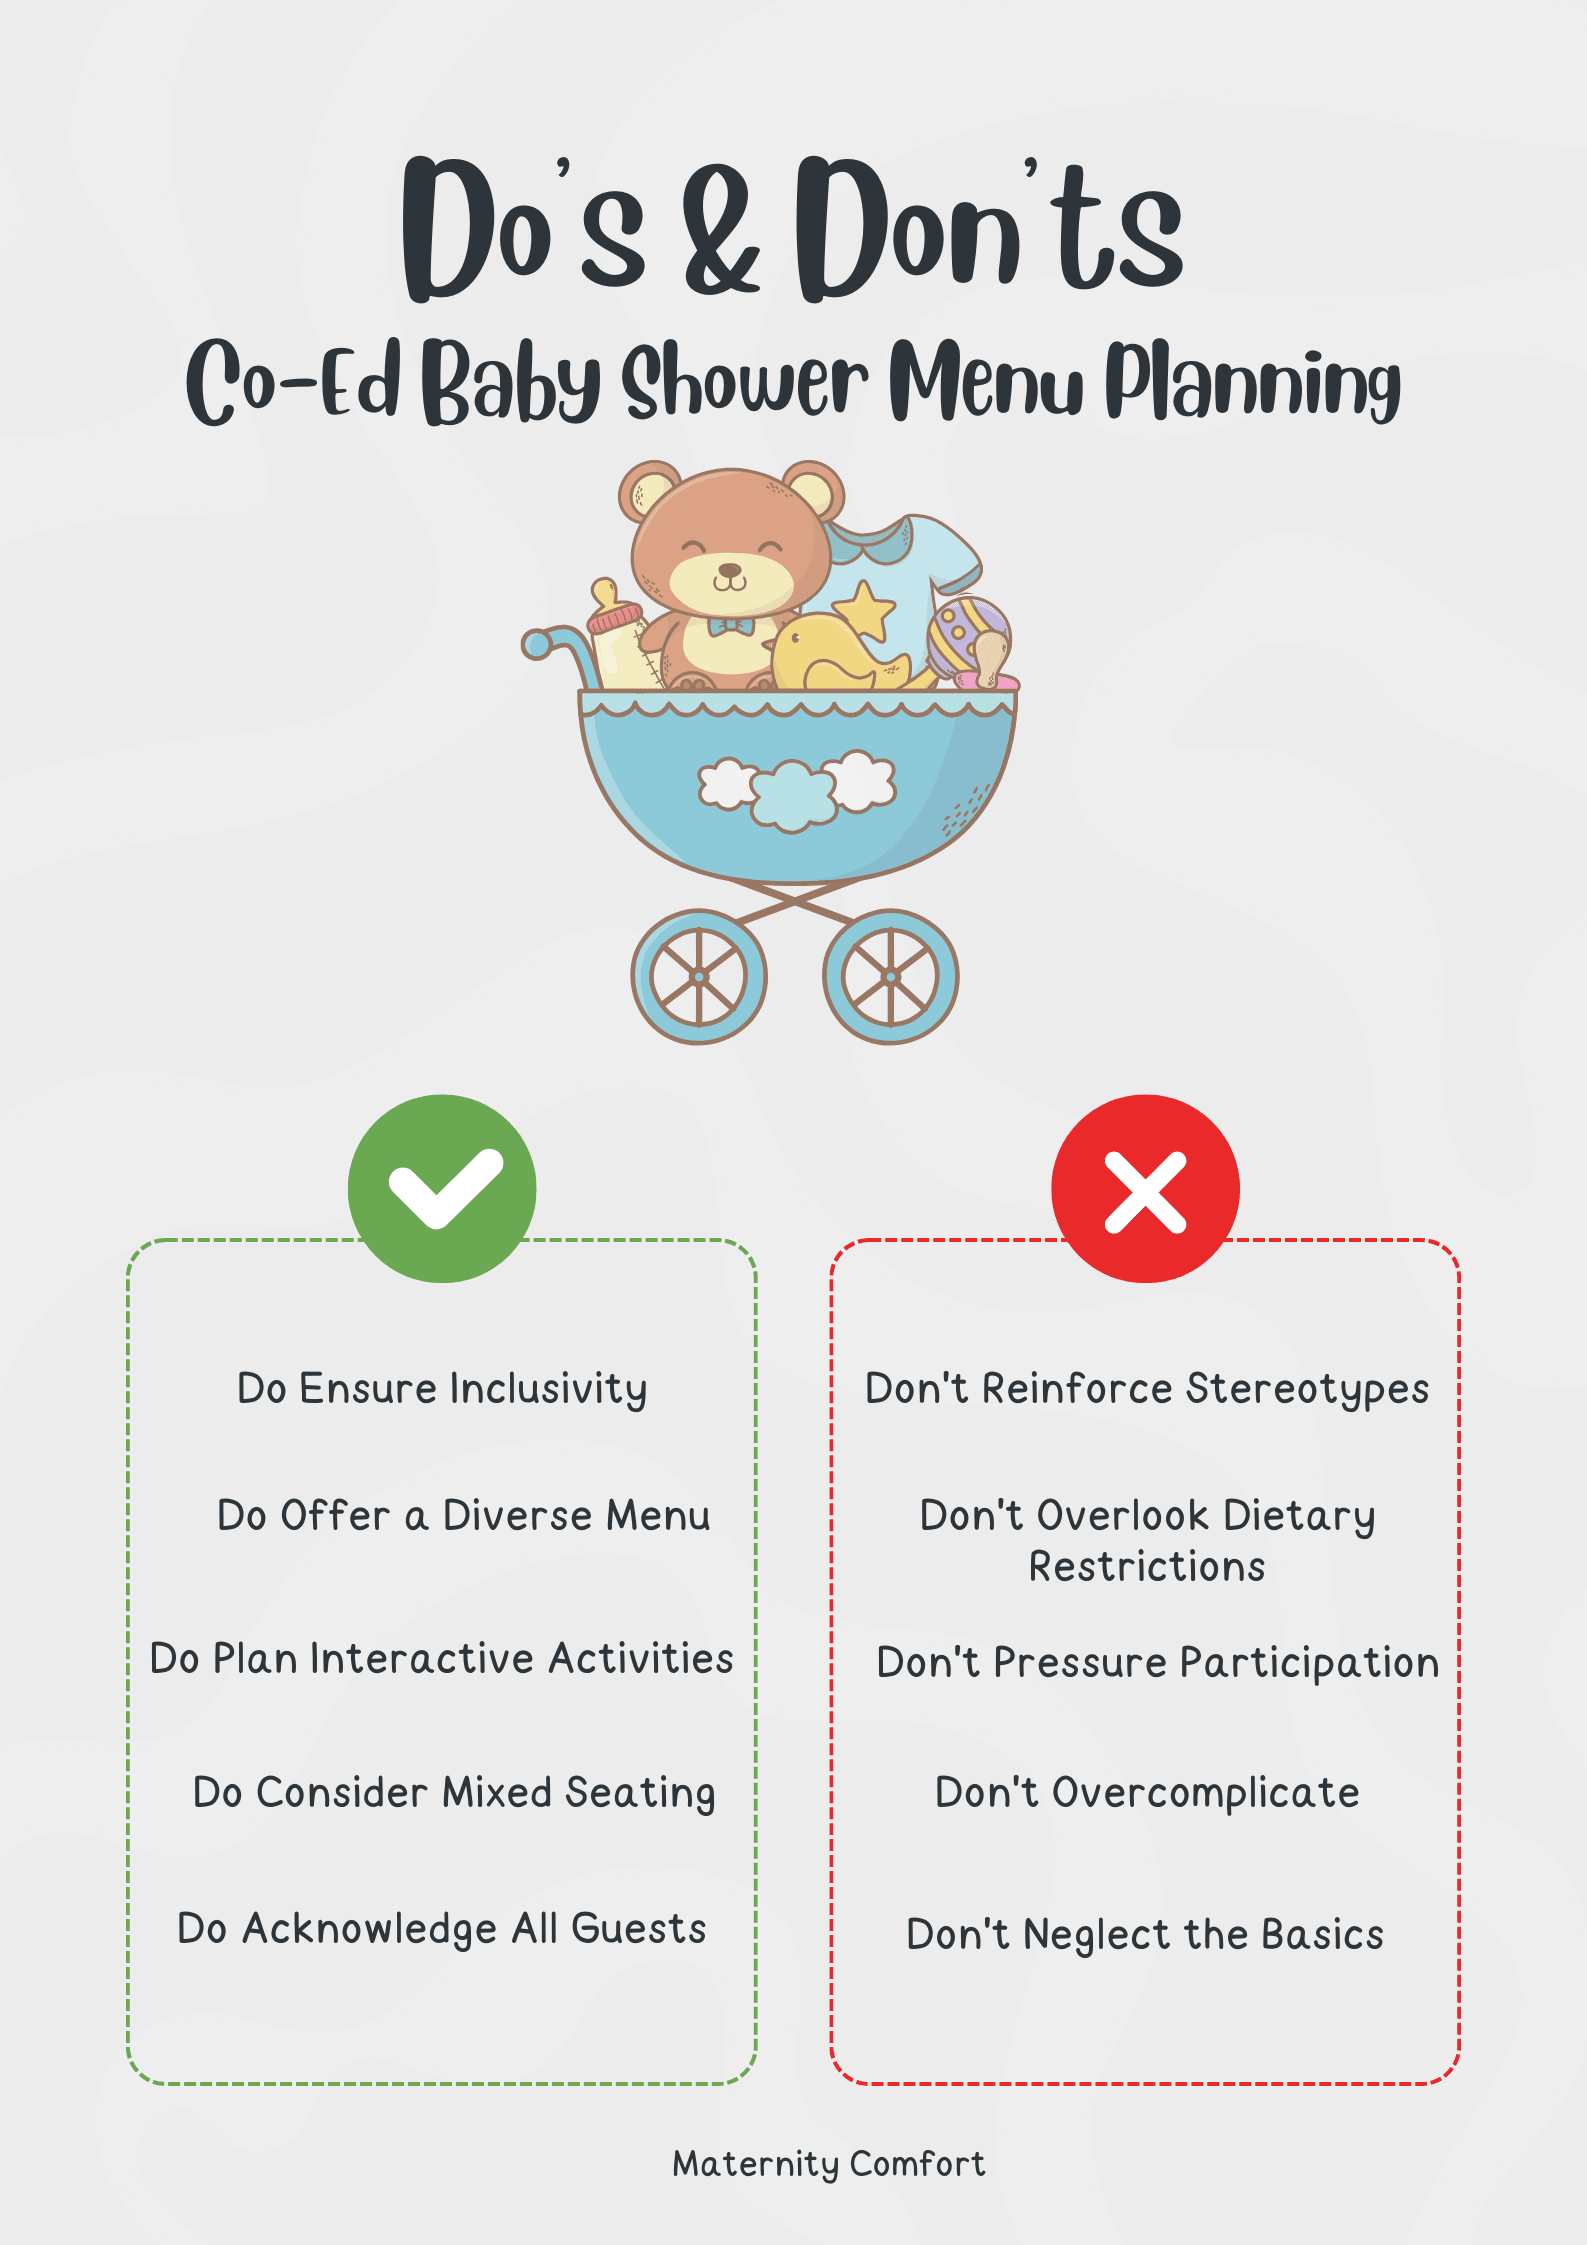 dos and don'ts for co ed baby shower menu planning